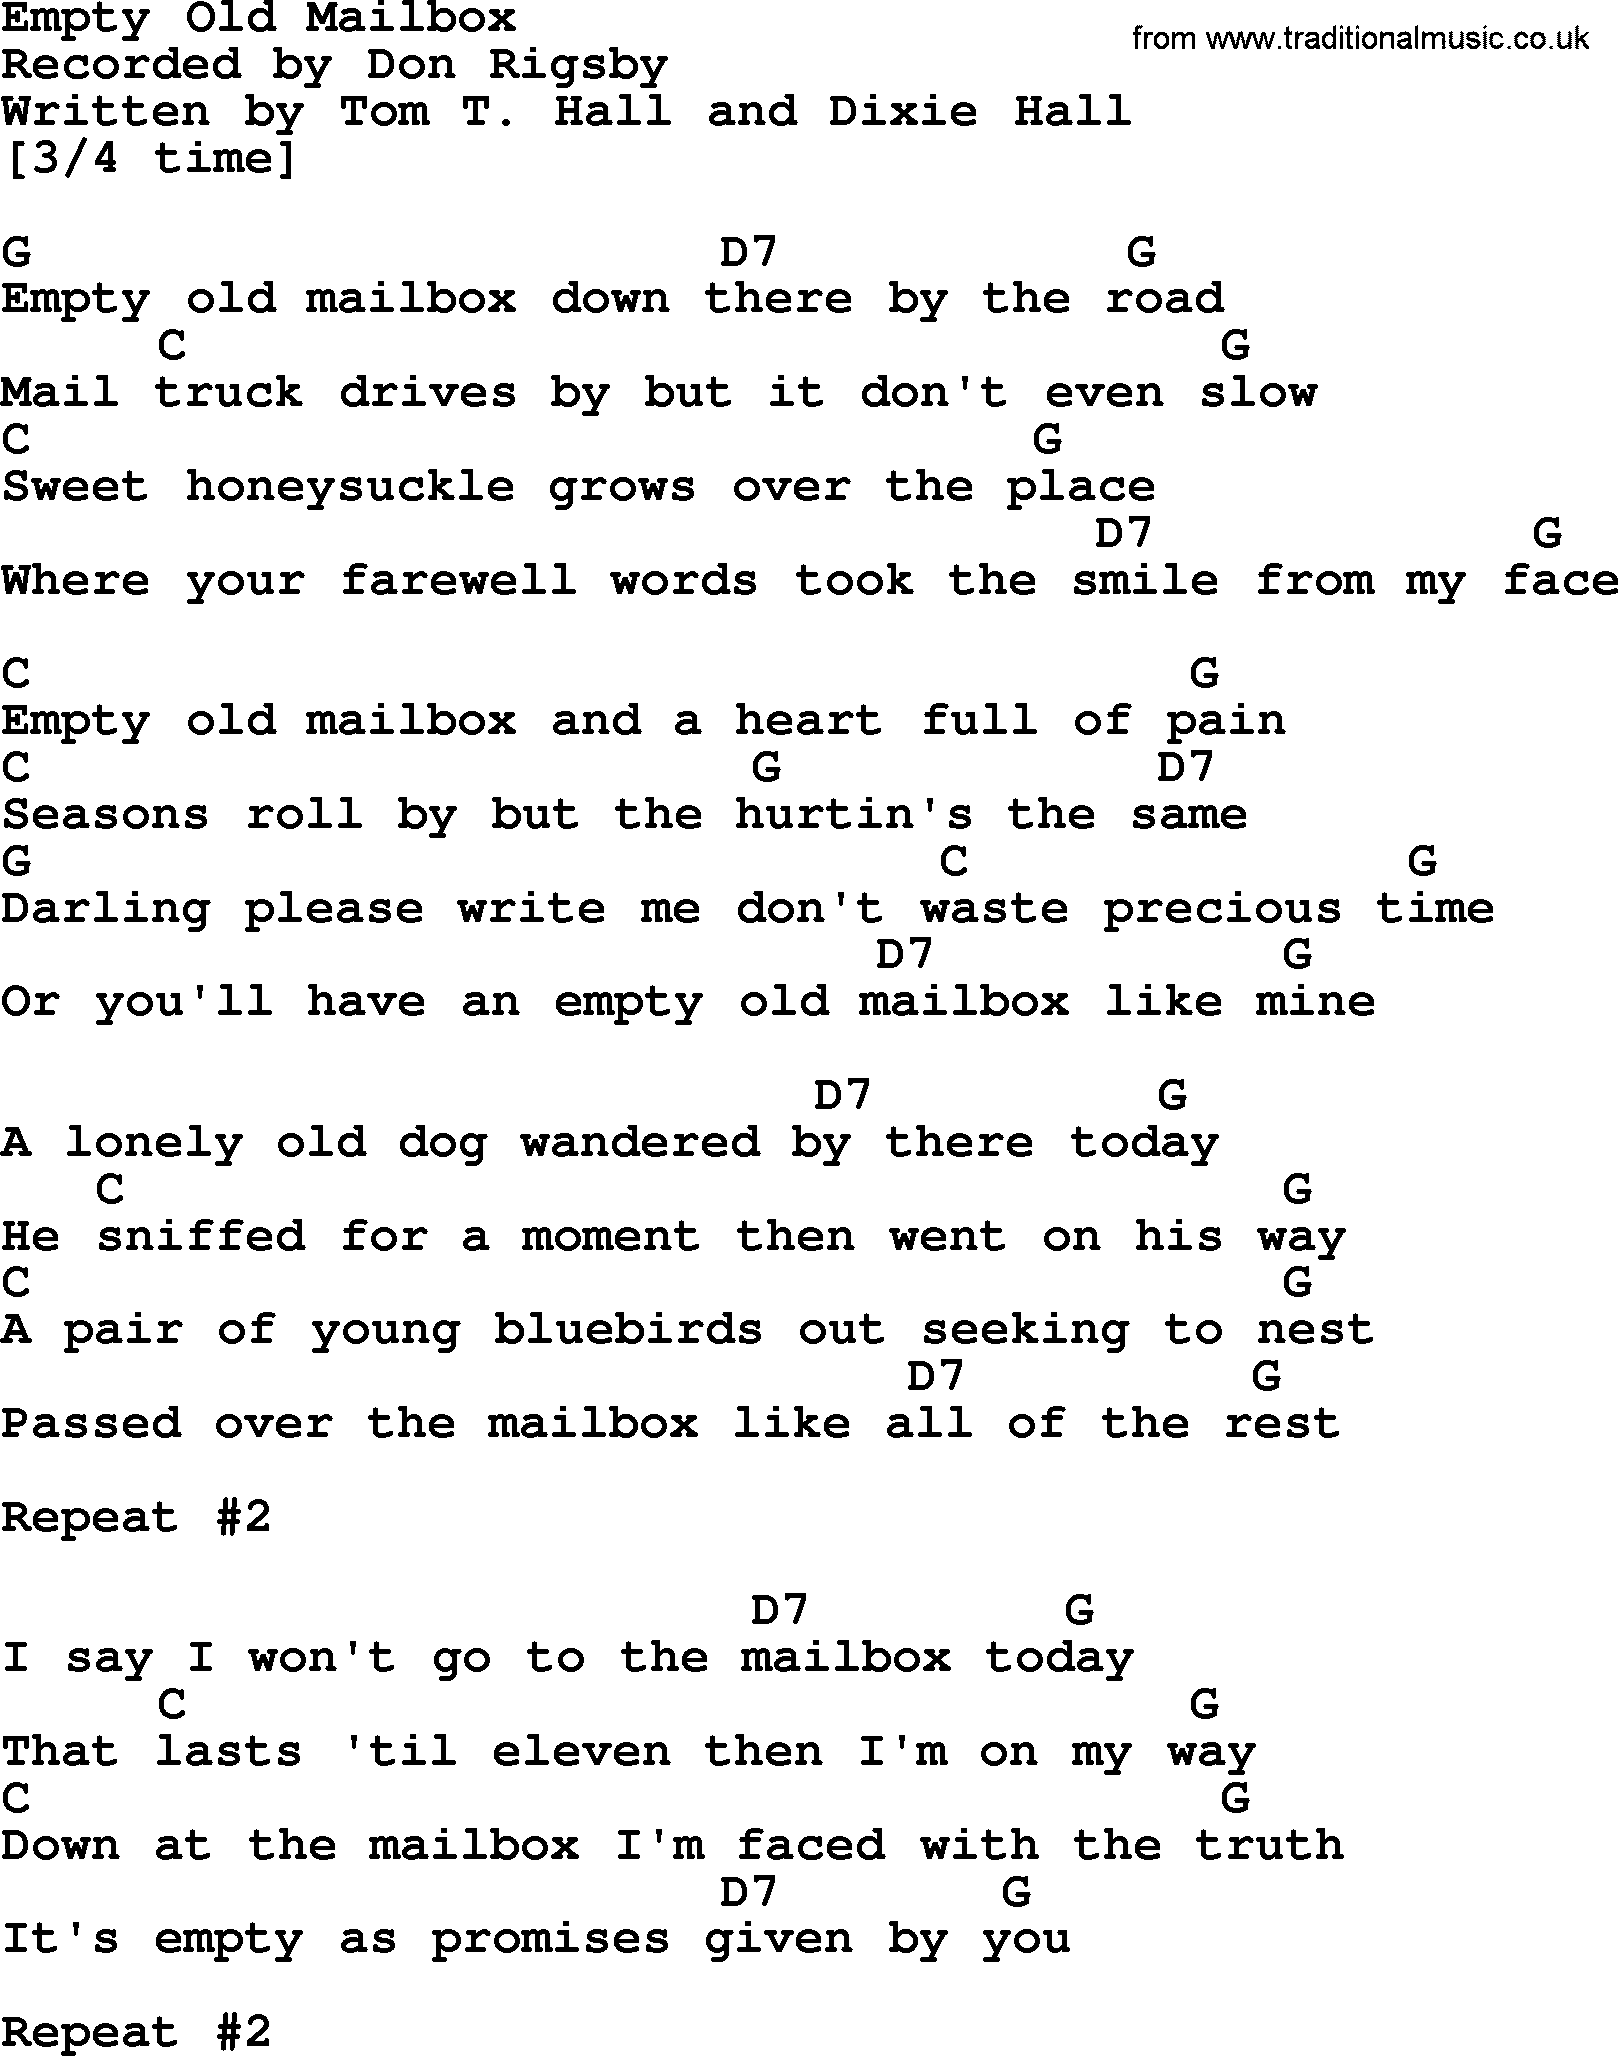 Bluegrass song: Empty Old Mailbox, lyrics and chords